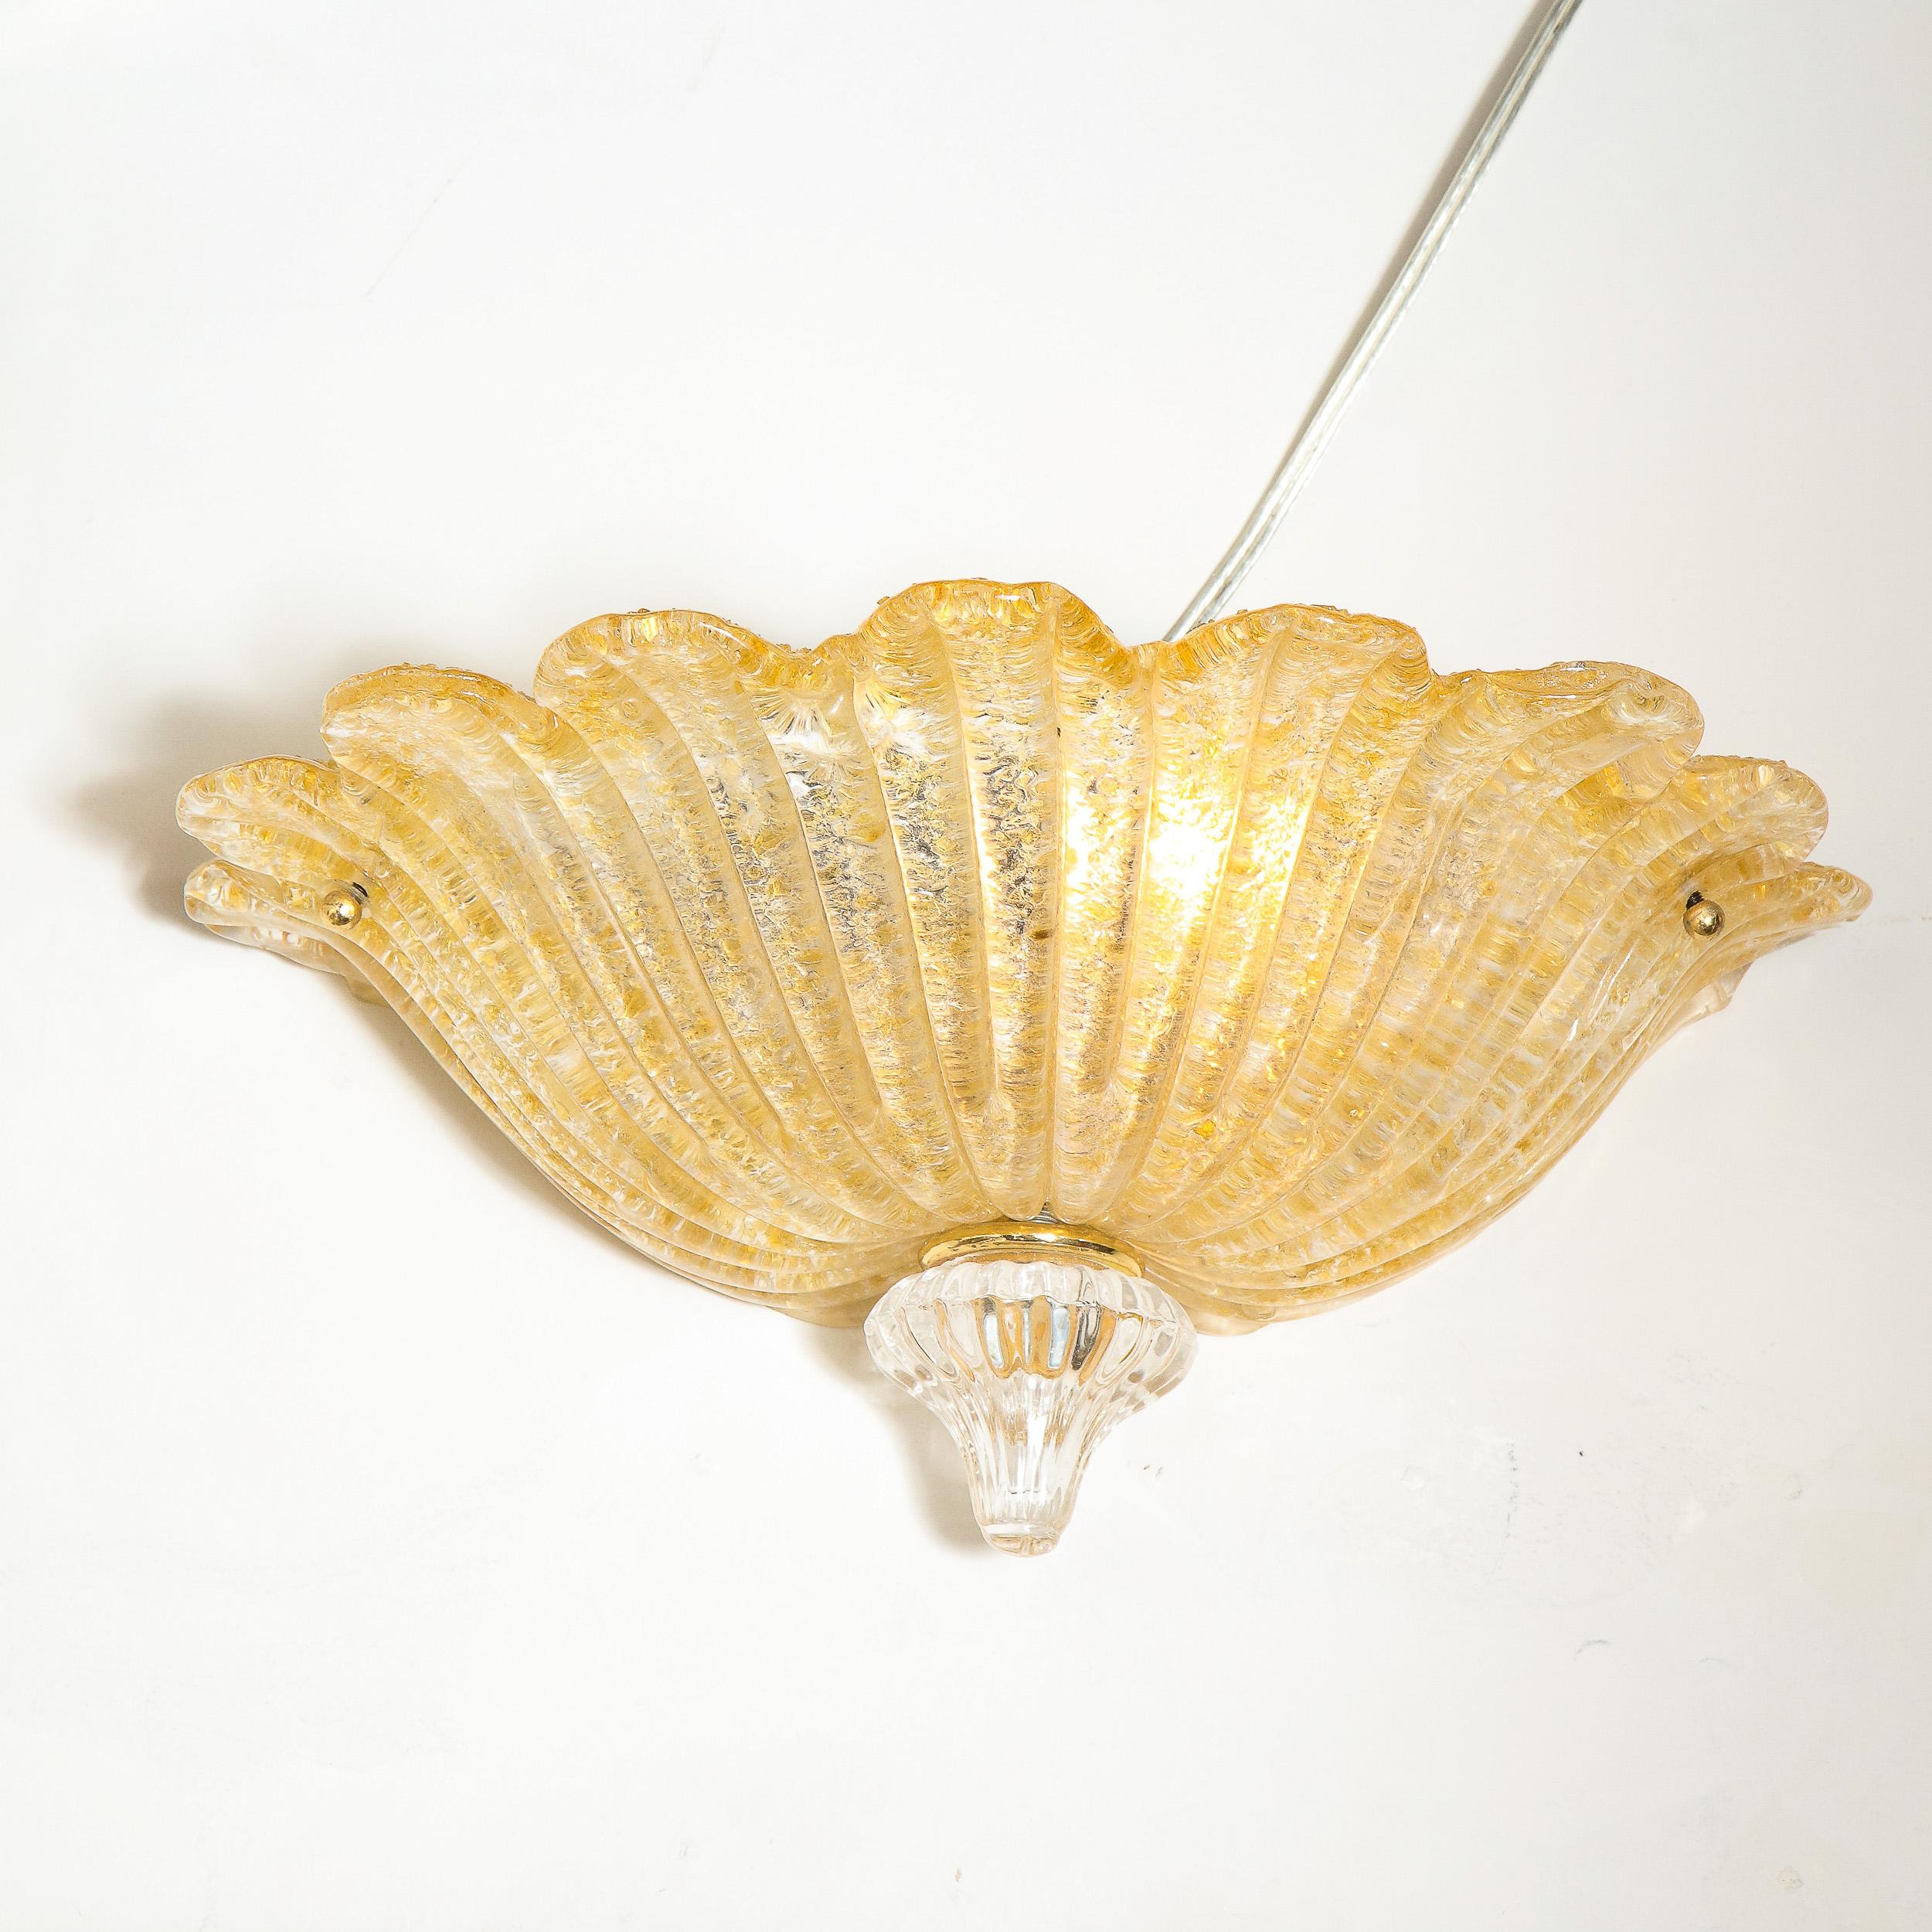 This elegant modernist wall sconce was realized in Murano, Italy- the island off the coast of Venice renowned for centuries for its superlative glass production. It features a textural billowing Murano glass body replete with an abundance of 24kt